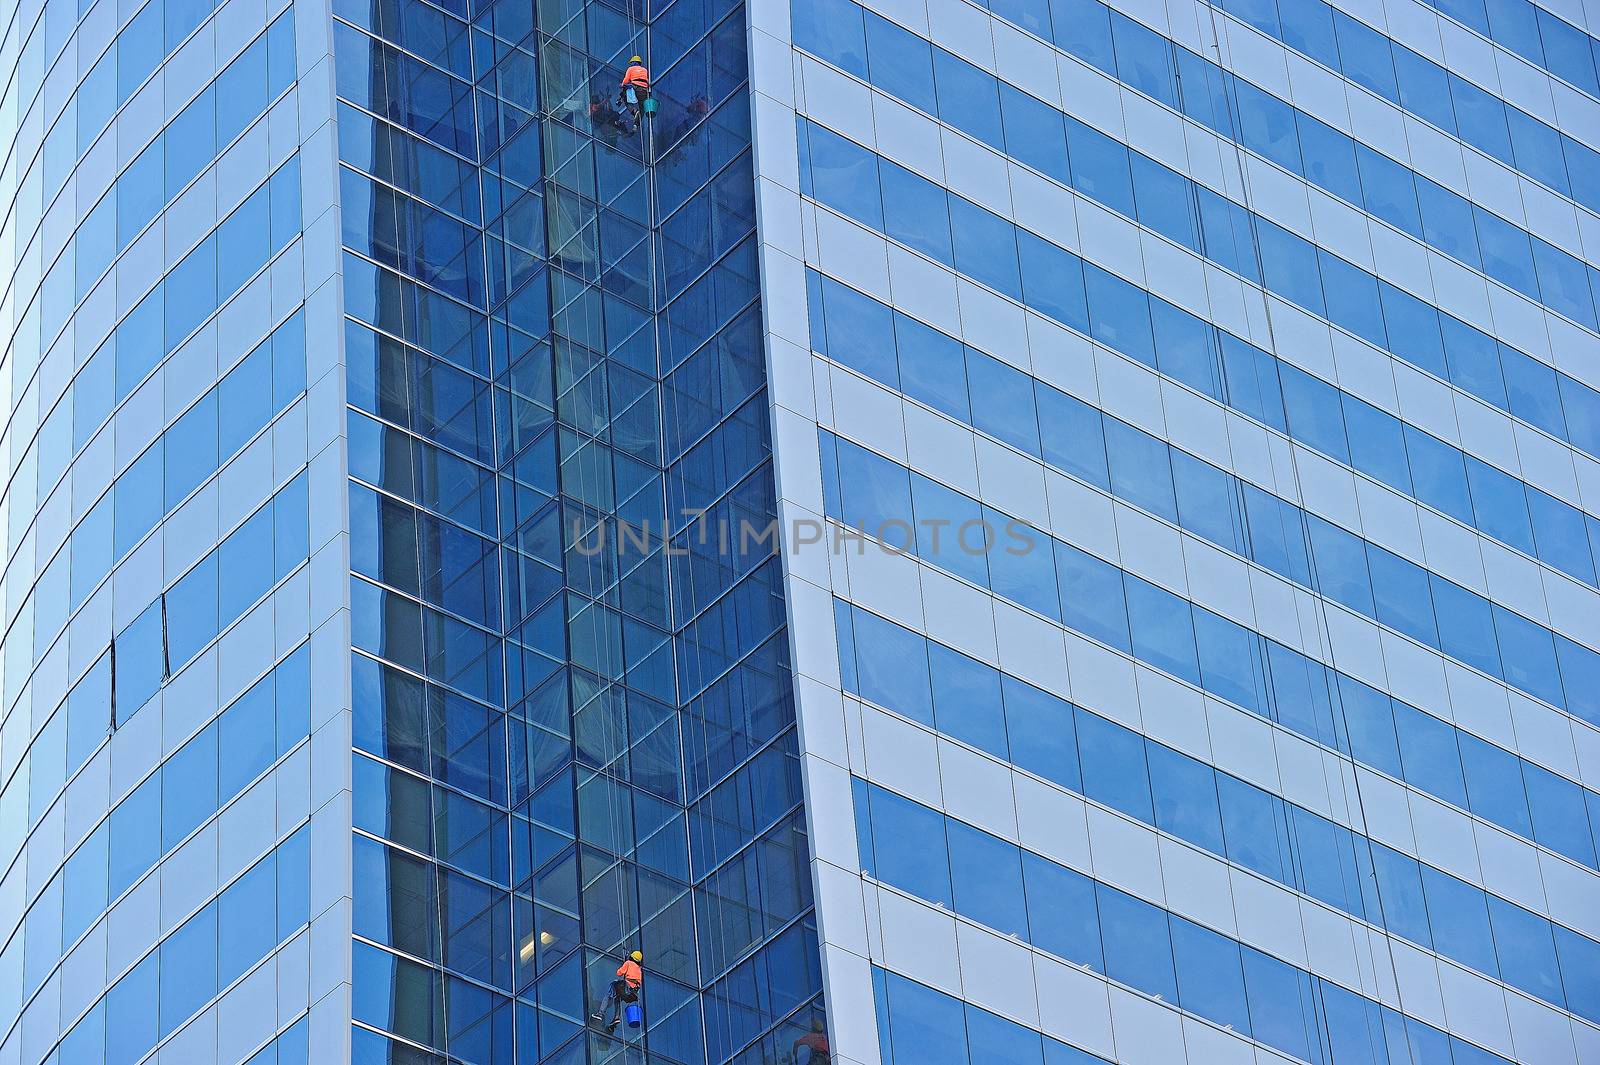 Workers suspended on a scaffold high up on a blue glass skyscraper